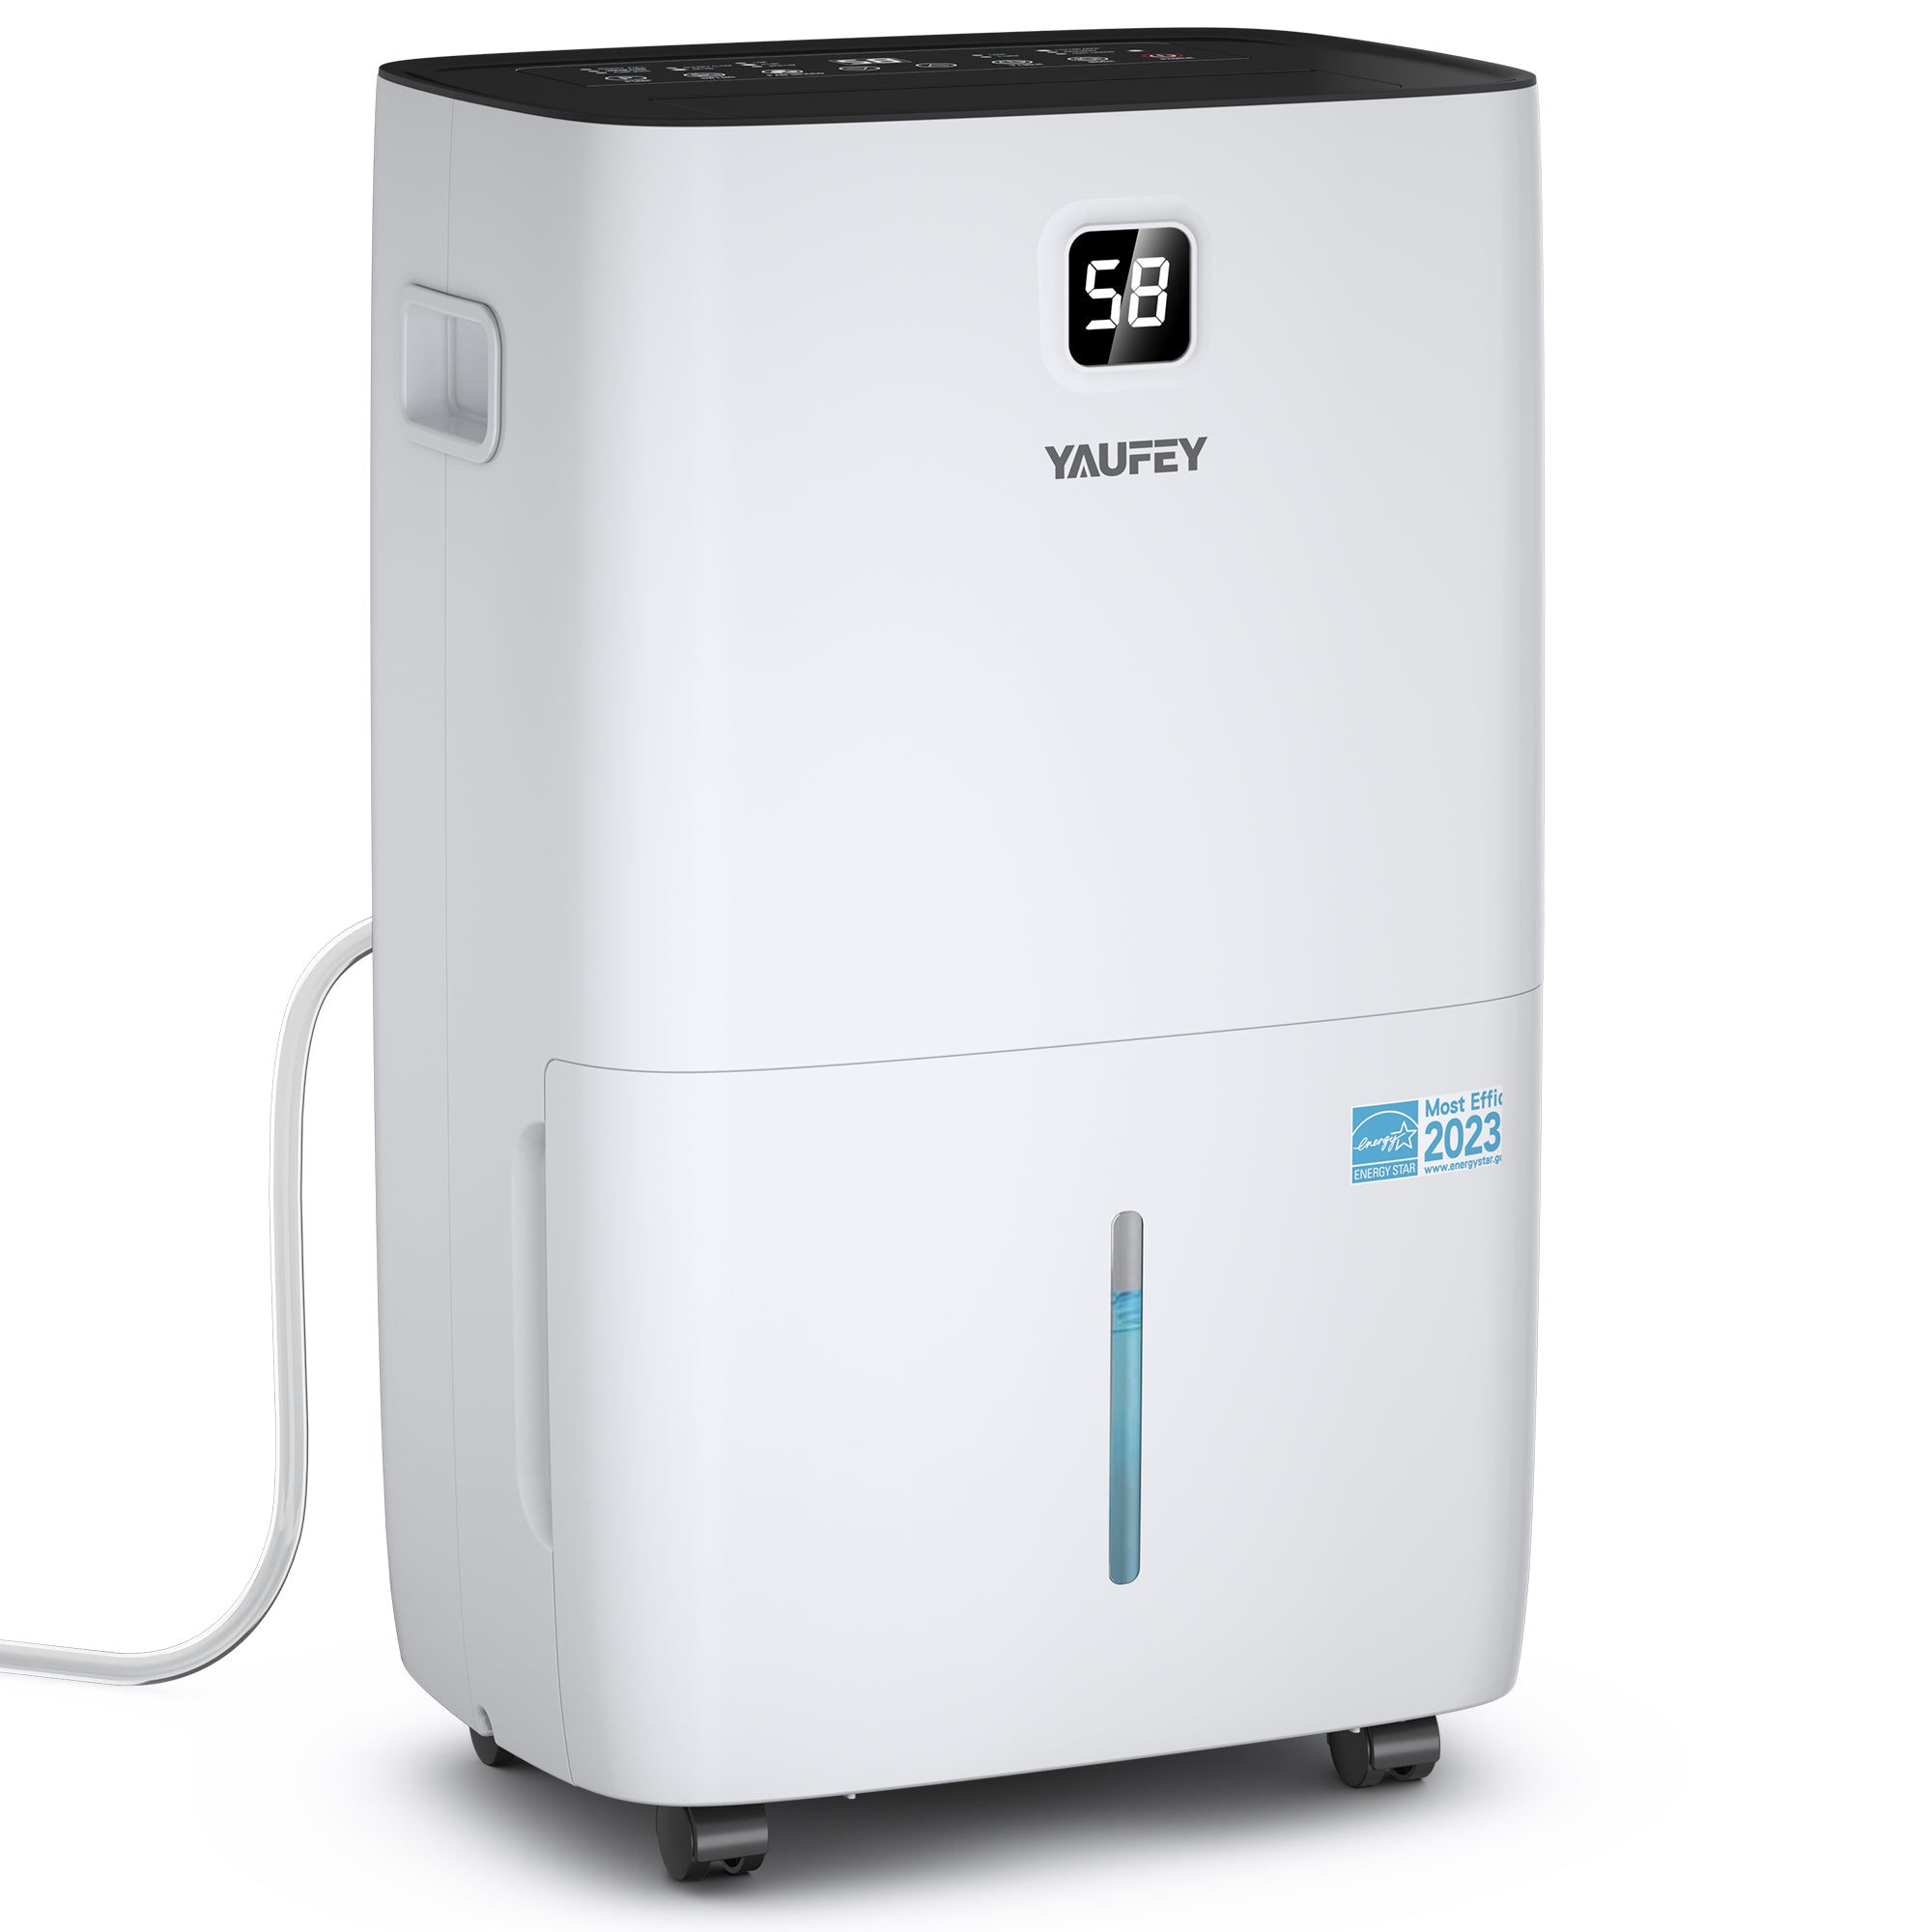 Yaufey 150-Pint Energy Star Dehumidifier for Large Rooms, Home Basement and Whole House, Powerful for 8000 Sq. Ft, with Large Water Tank, Drain Hose, Timer, Intelligent Humidity Control (Model: JD026R-150)